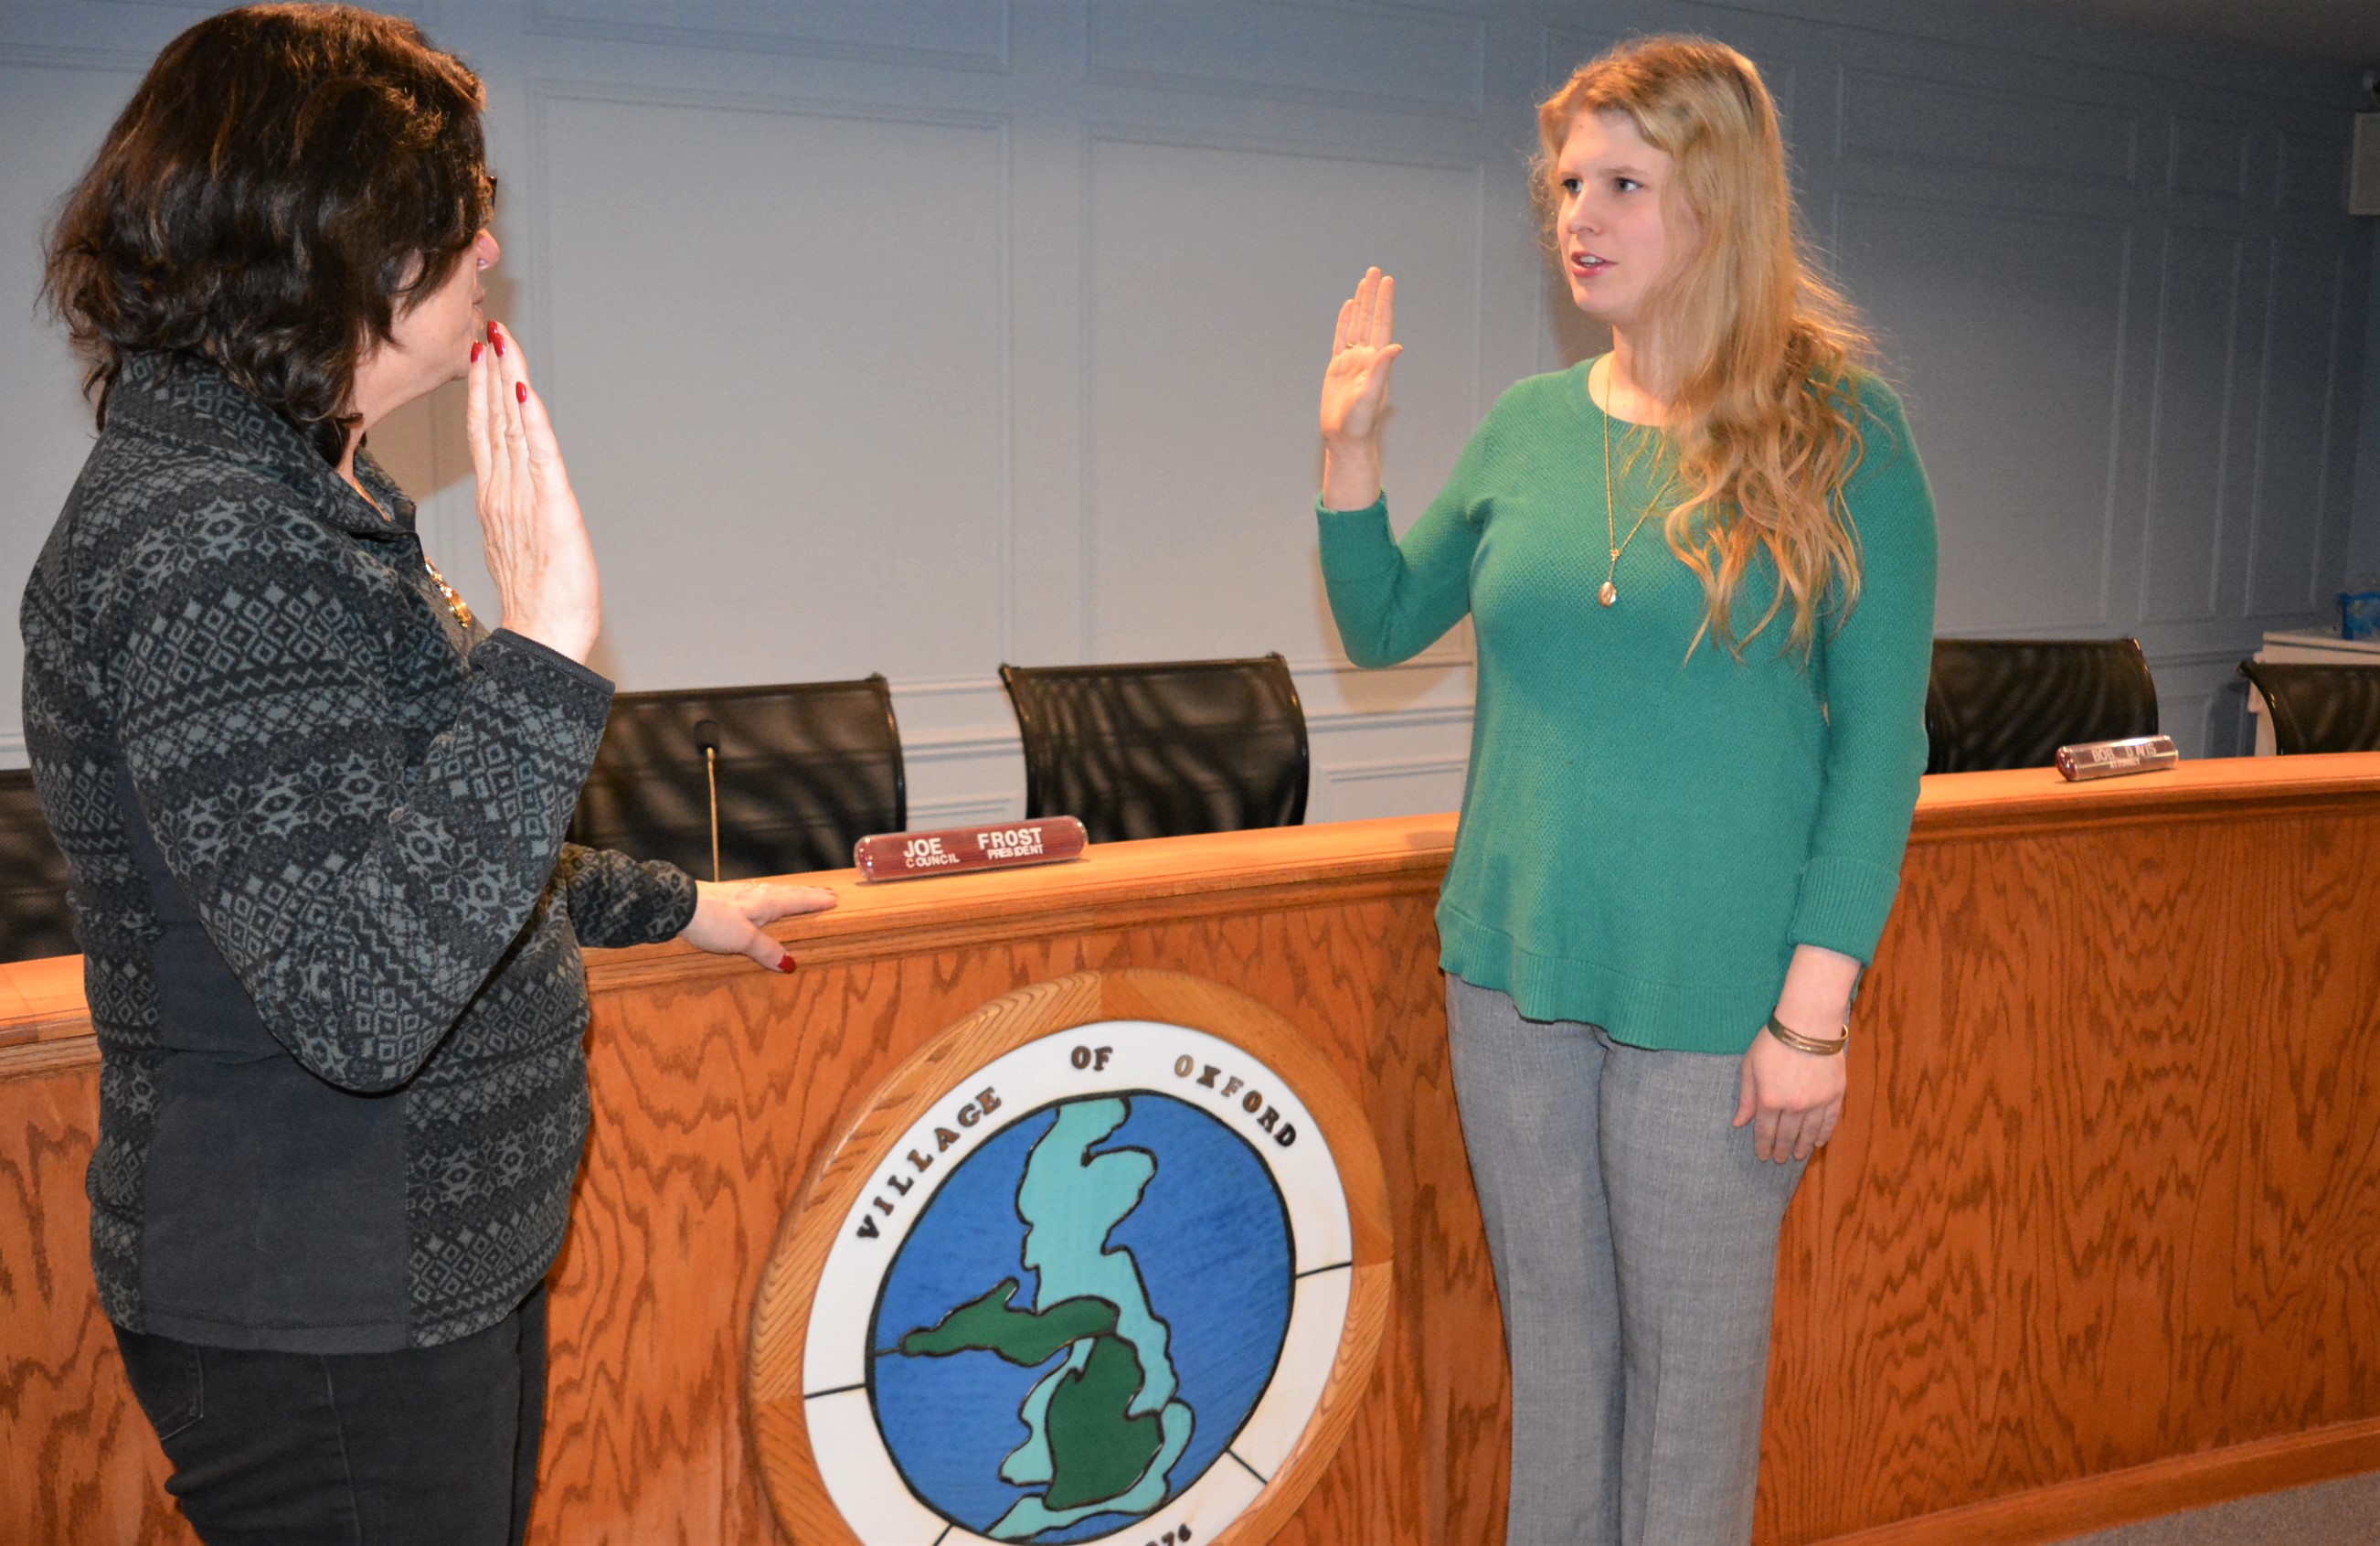 New Oxford Village Councilwoman Allison Kemp (right), 26, was sworn into office on Jan. 10 by Clerk Teresa Onica. Photo by C.J. Carnacchio.